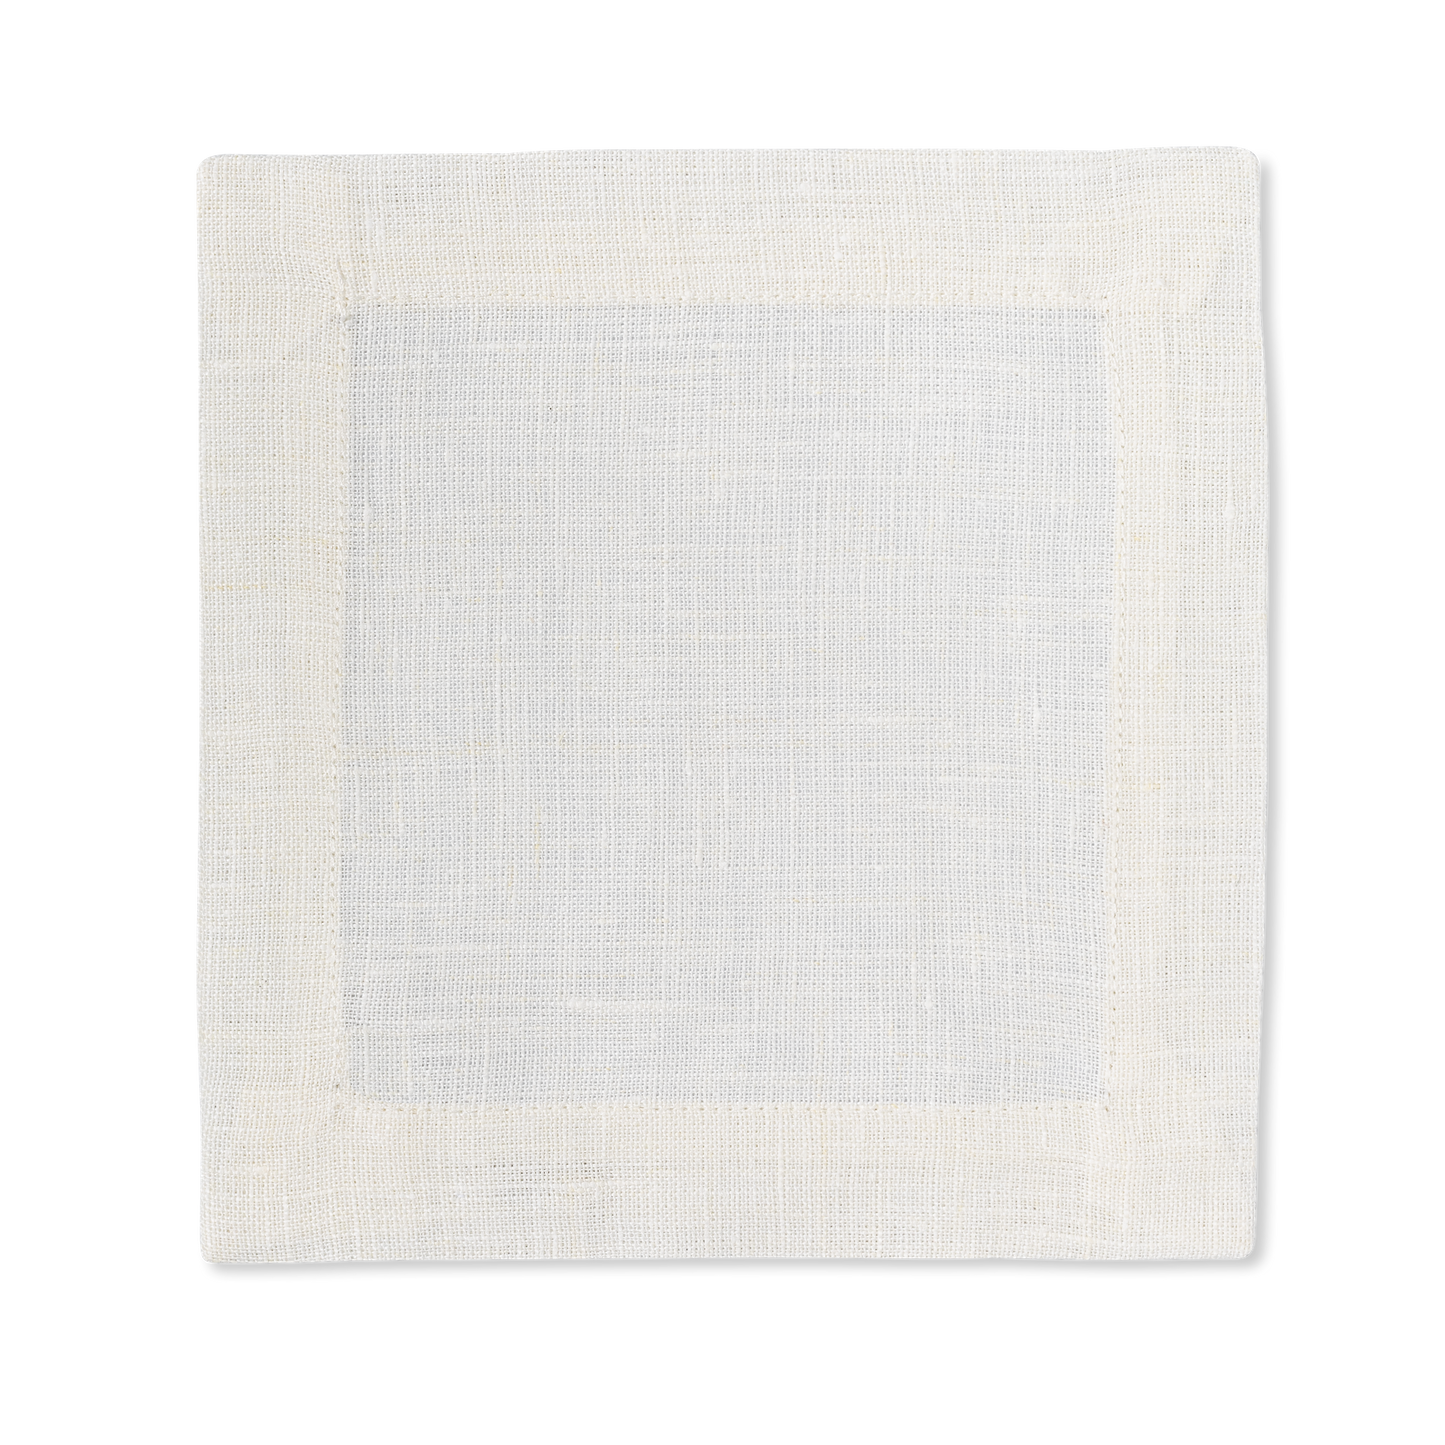 A square linen cocktail napkin in the color oyster